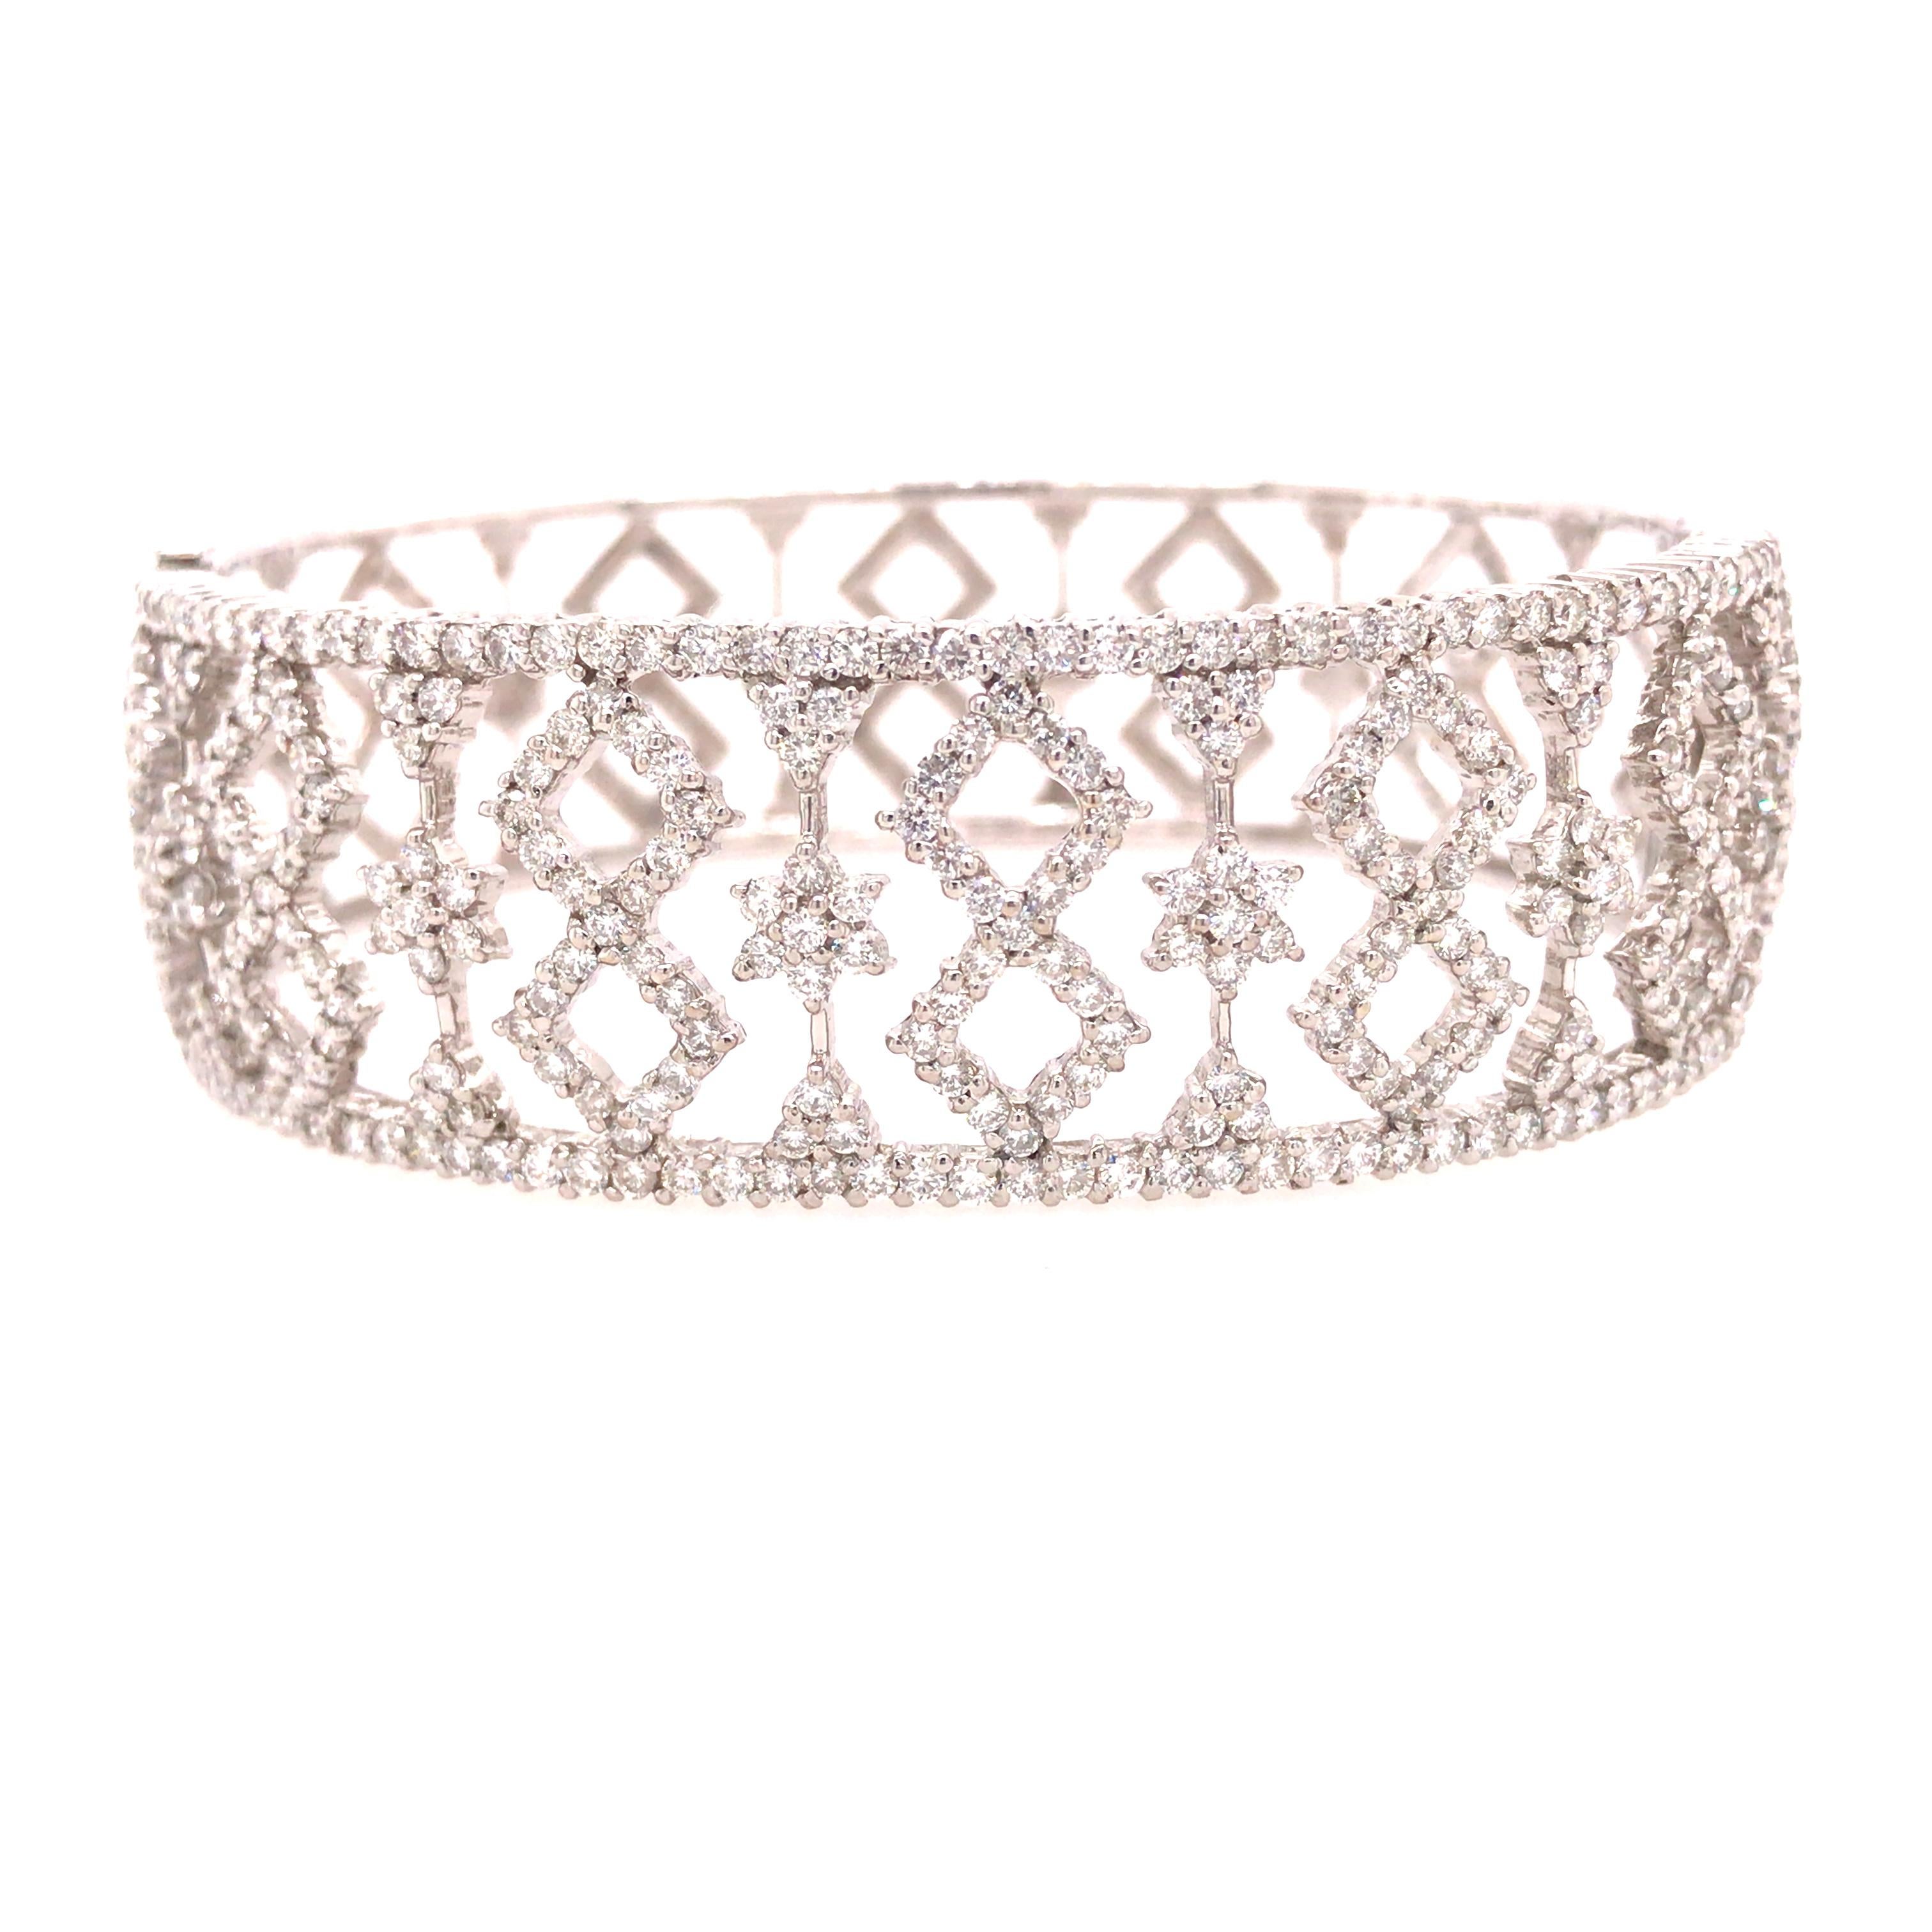 Diamond Wide Bangle Cuff in 18K White Gold. Round Brilliant Cut Diamonds weighing 6.70 carat total weight, G-H in color and VS-SI in clarity are expertly set. The Bangle measures 7 inch inner circumference and 3/4 inch in width. 37.79 grams.